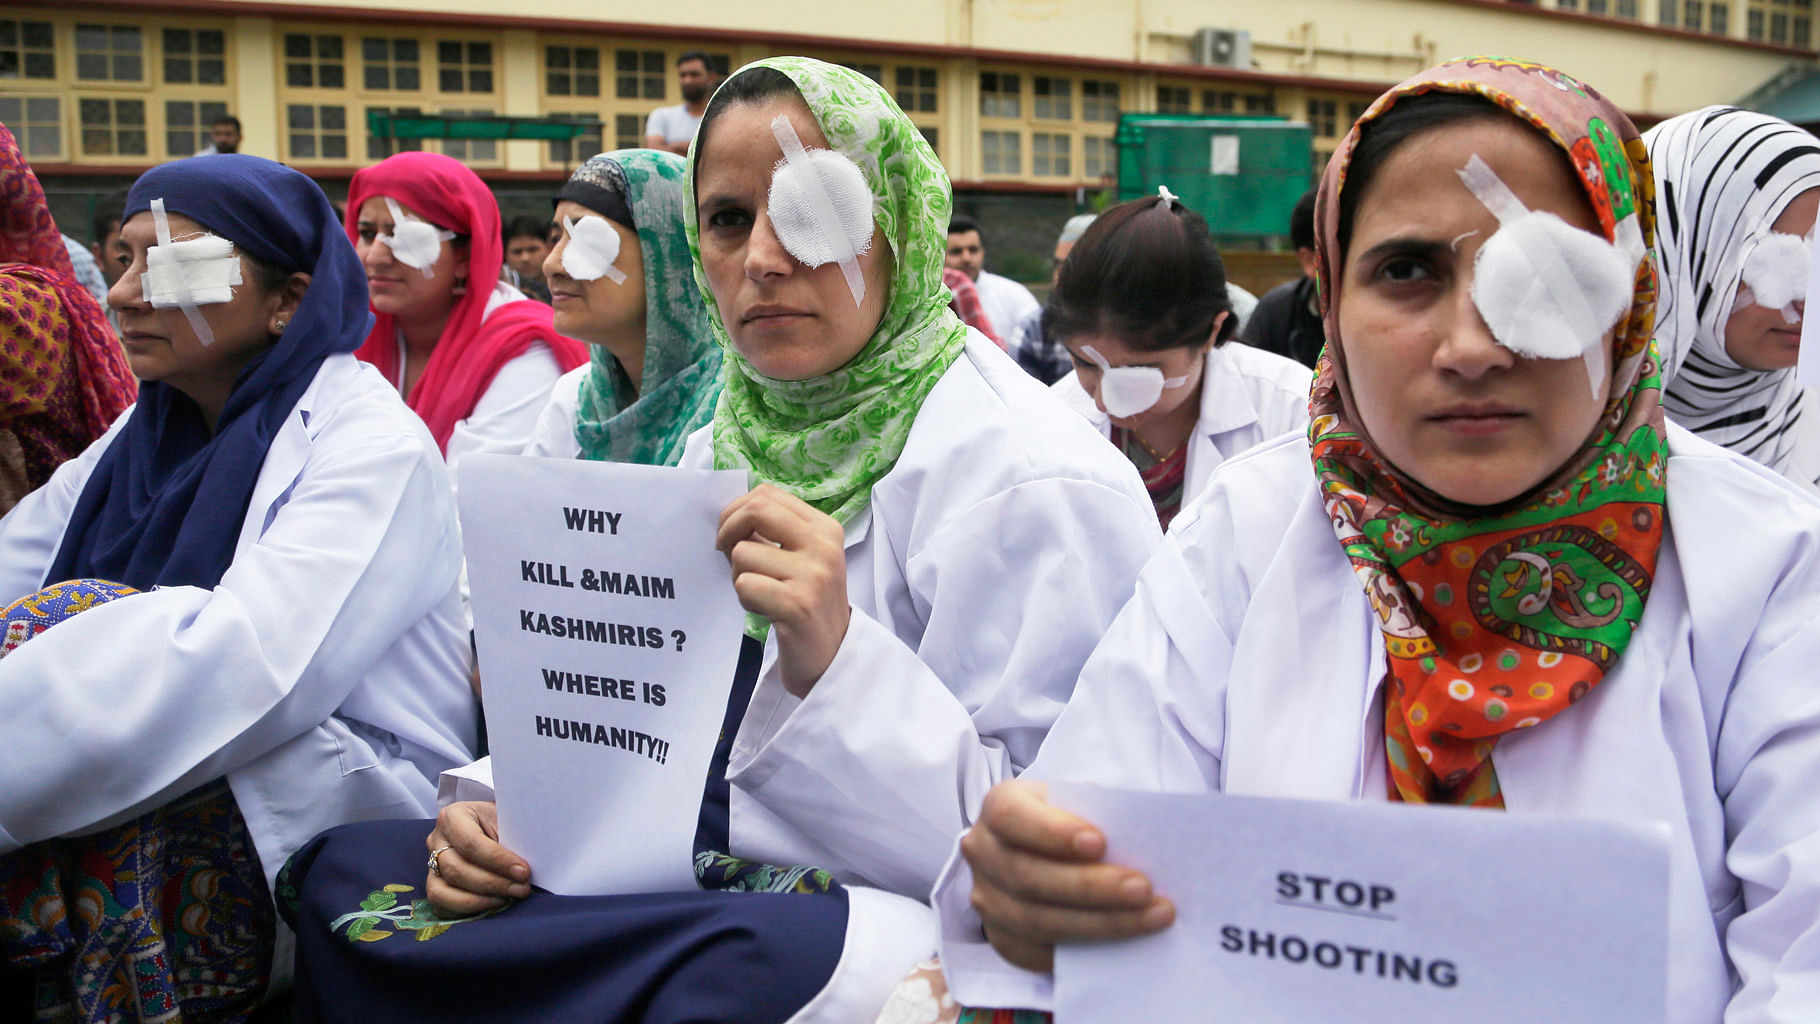 

Kashmiri women protesting against the use of pellets in the Valley. (Photo: AP)